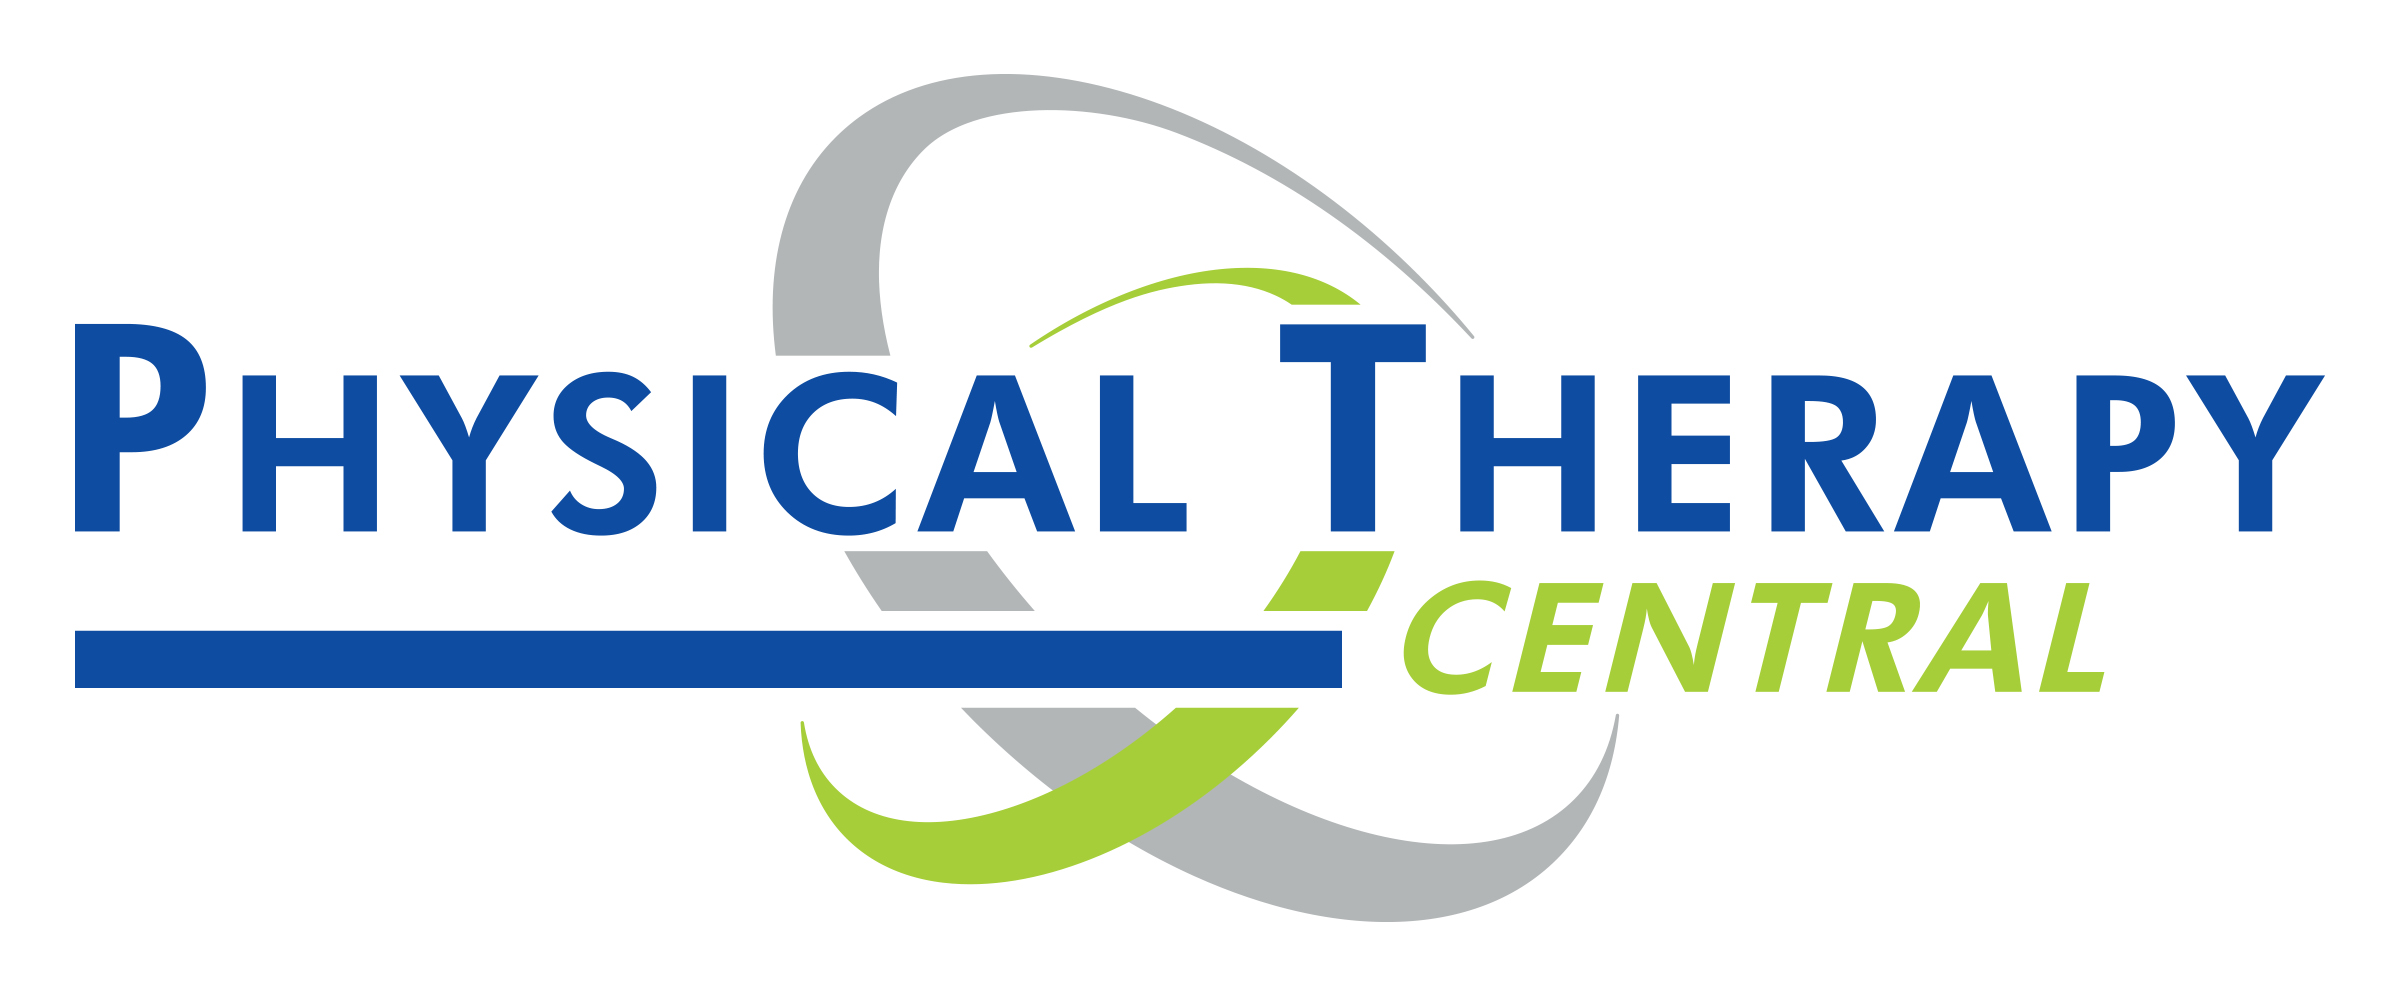 Physical Therapy Central-Oklahoma City (815 NW 12th Street)